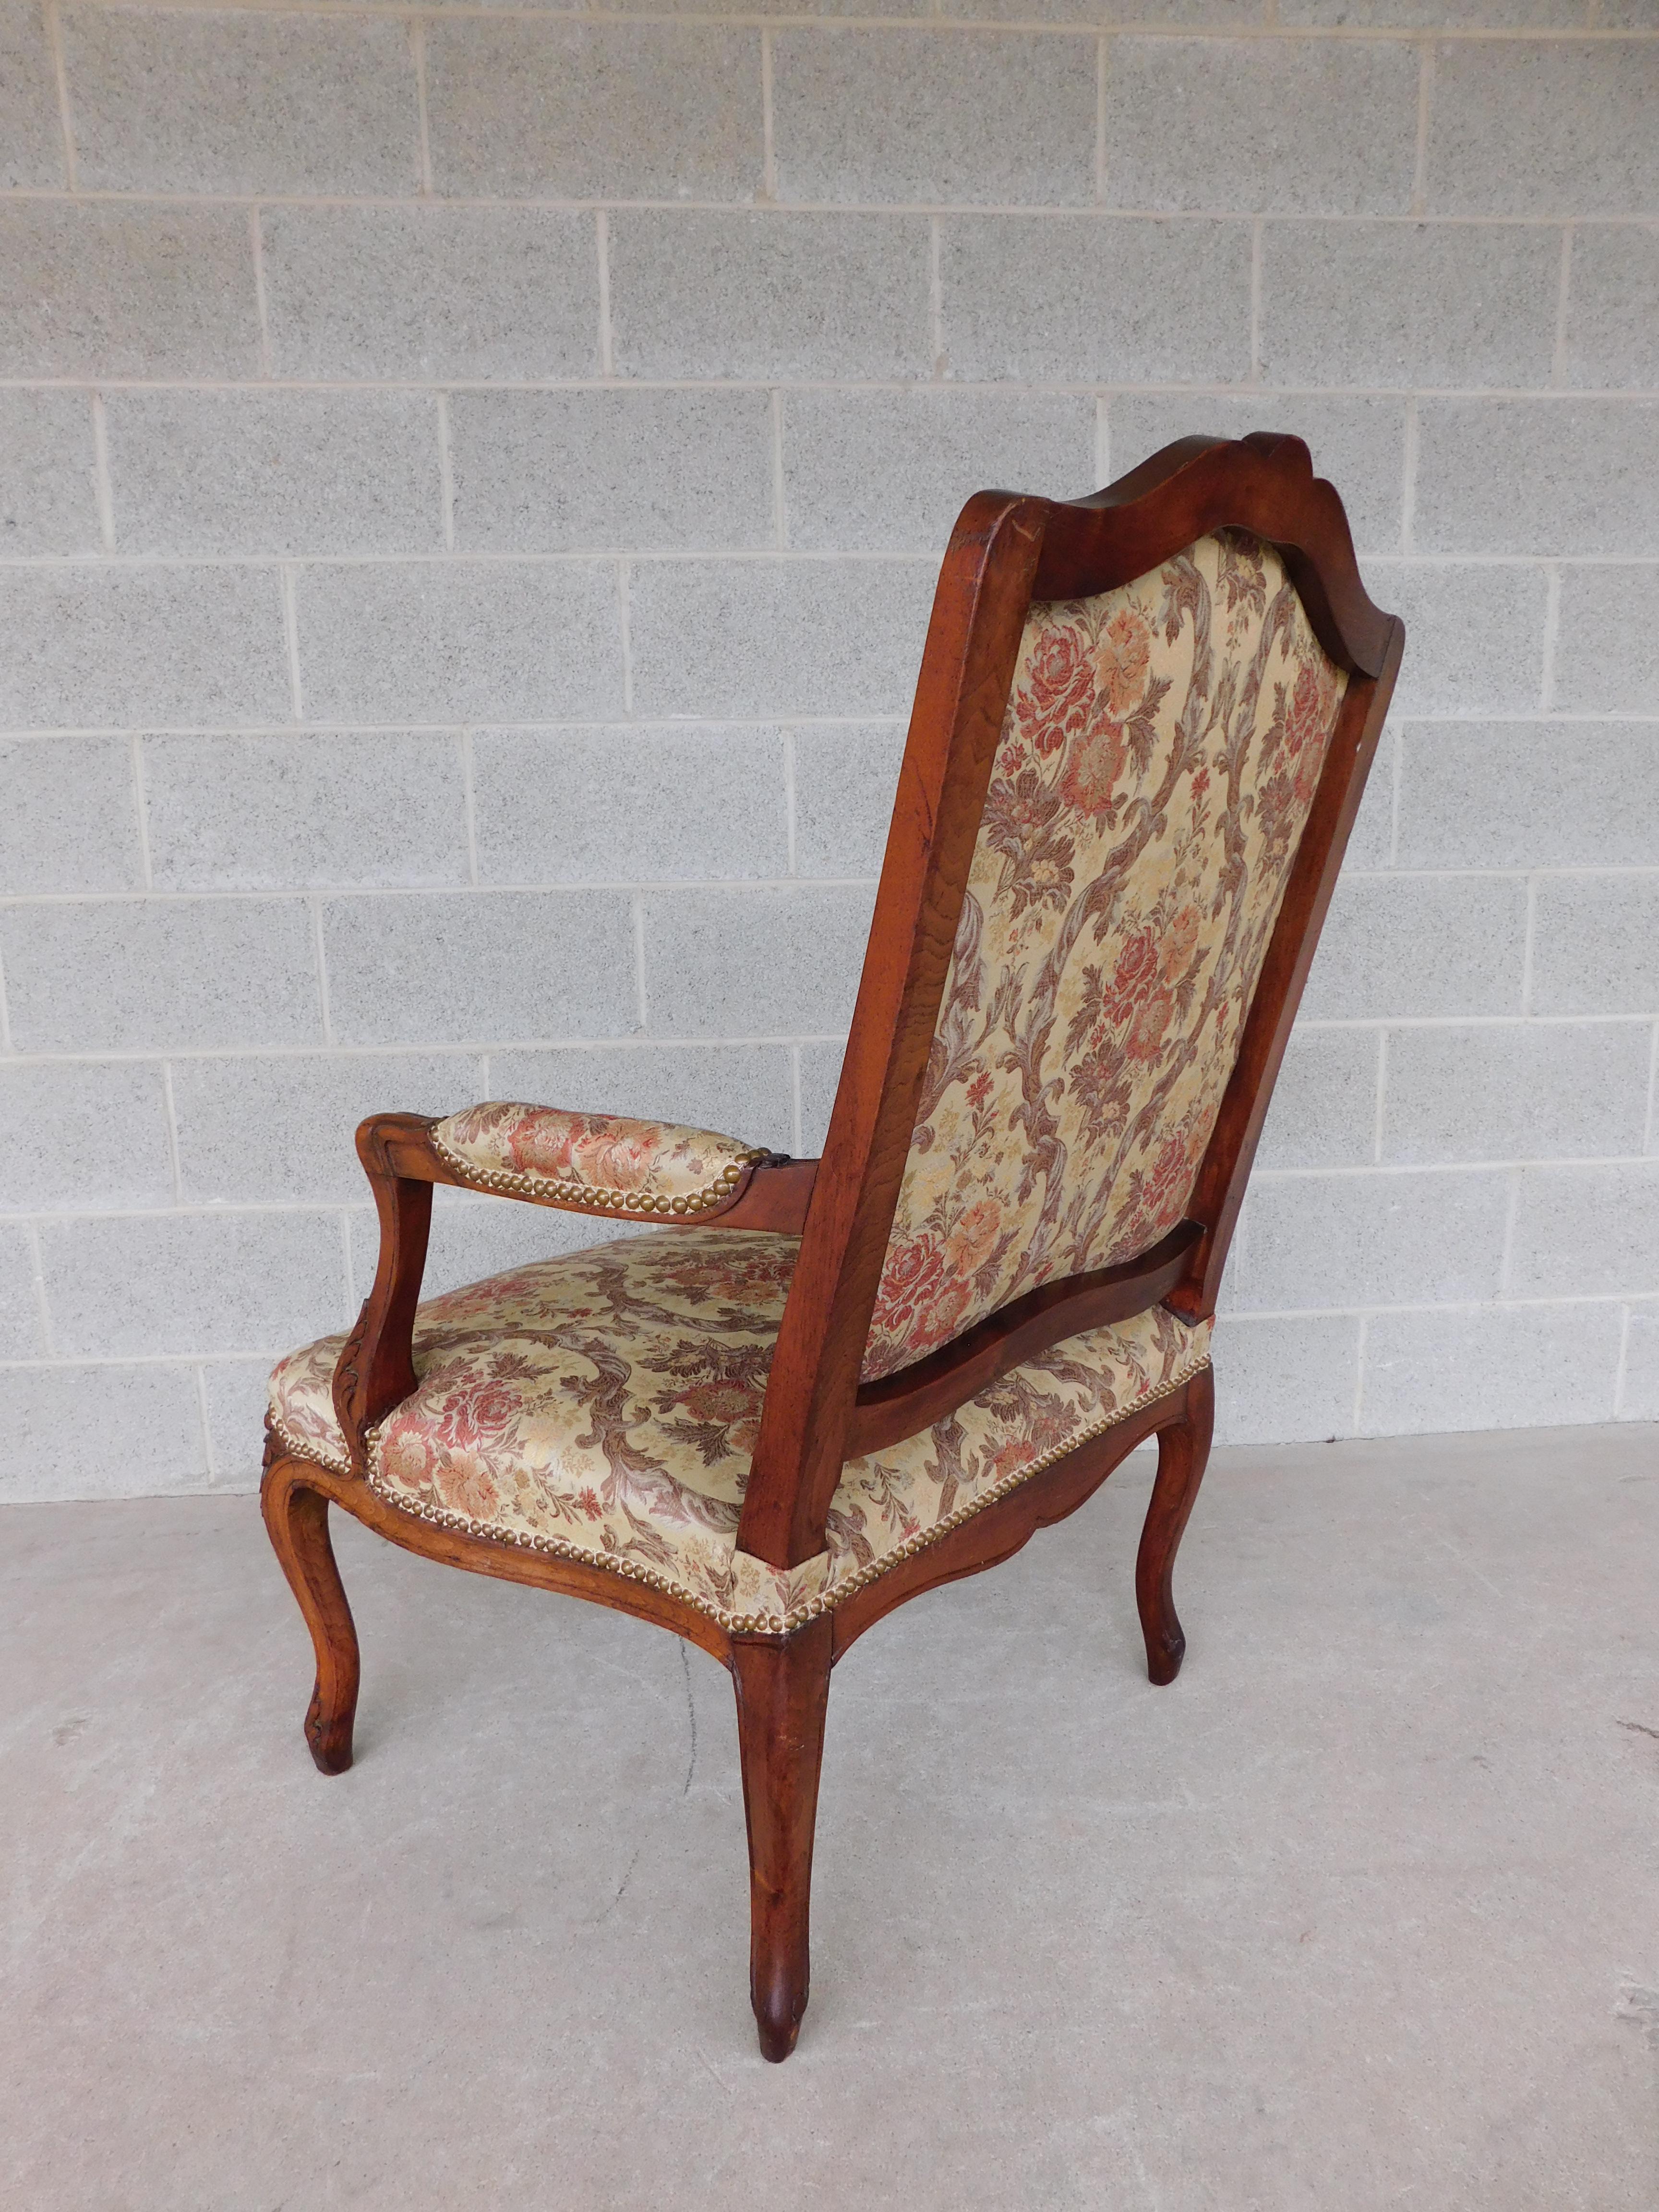 Vintage French Louis XV Style Fauteuil Chairs  - a Pair For Sale 6